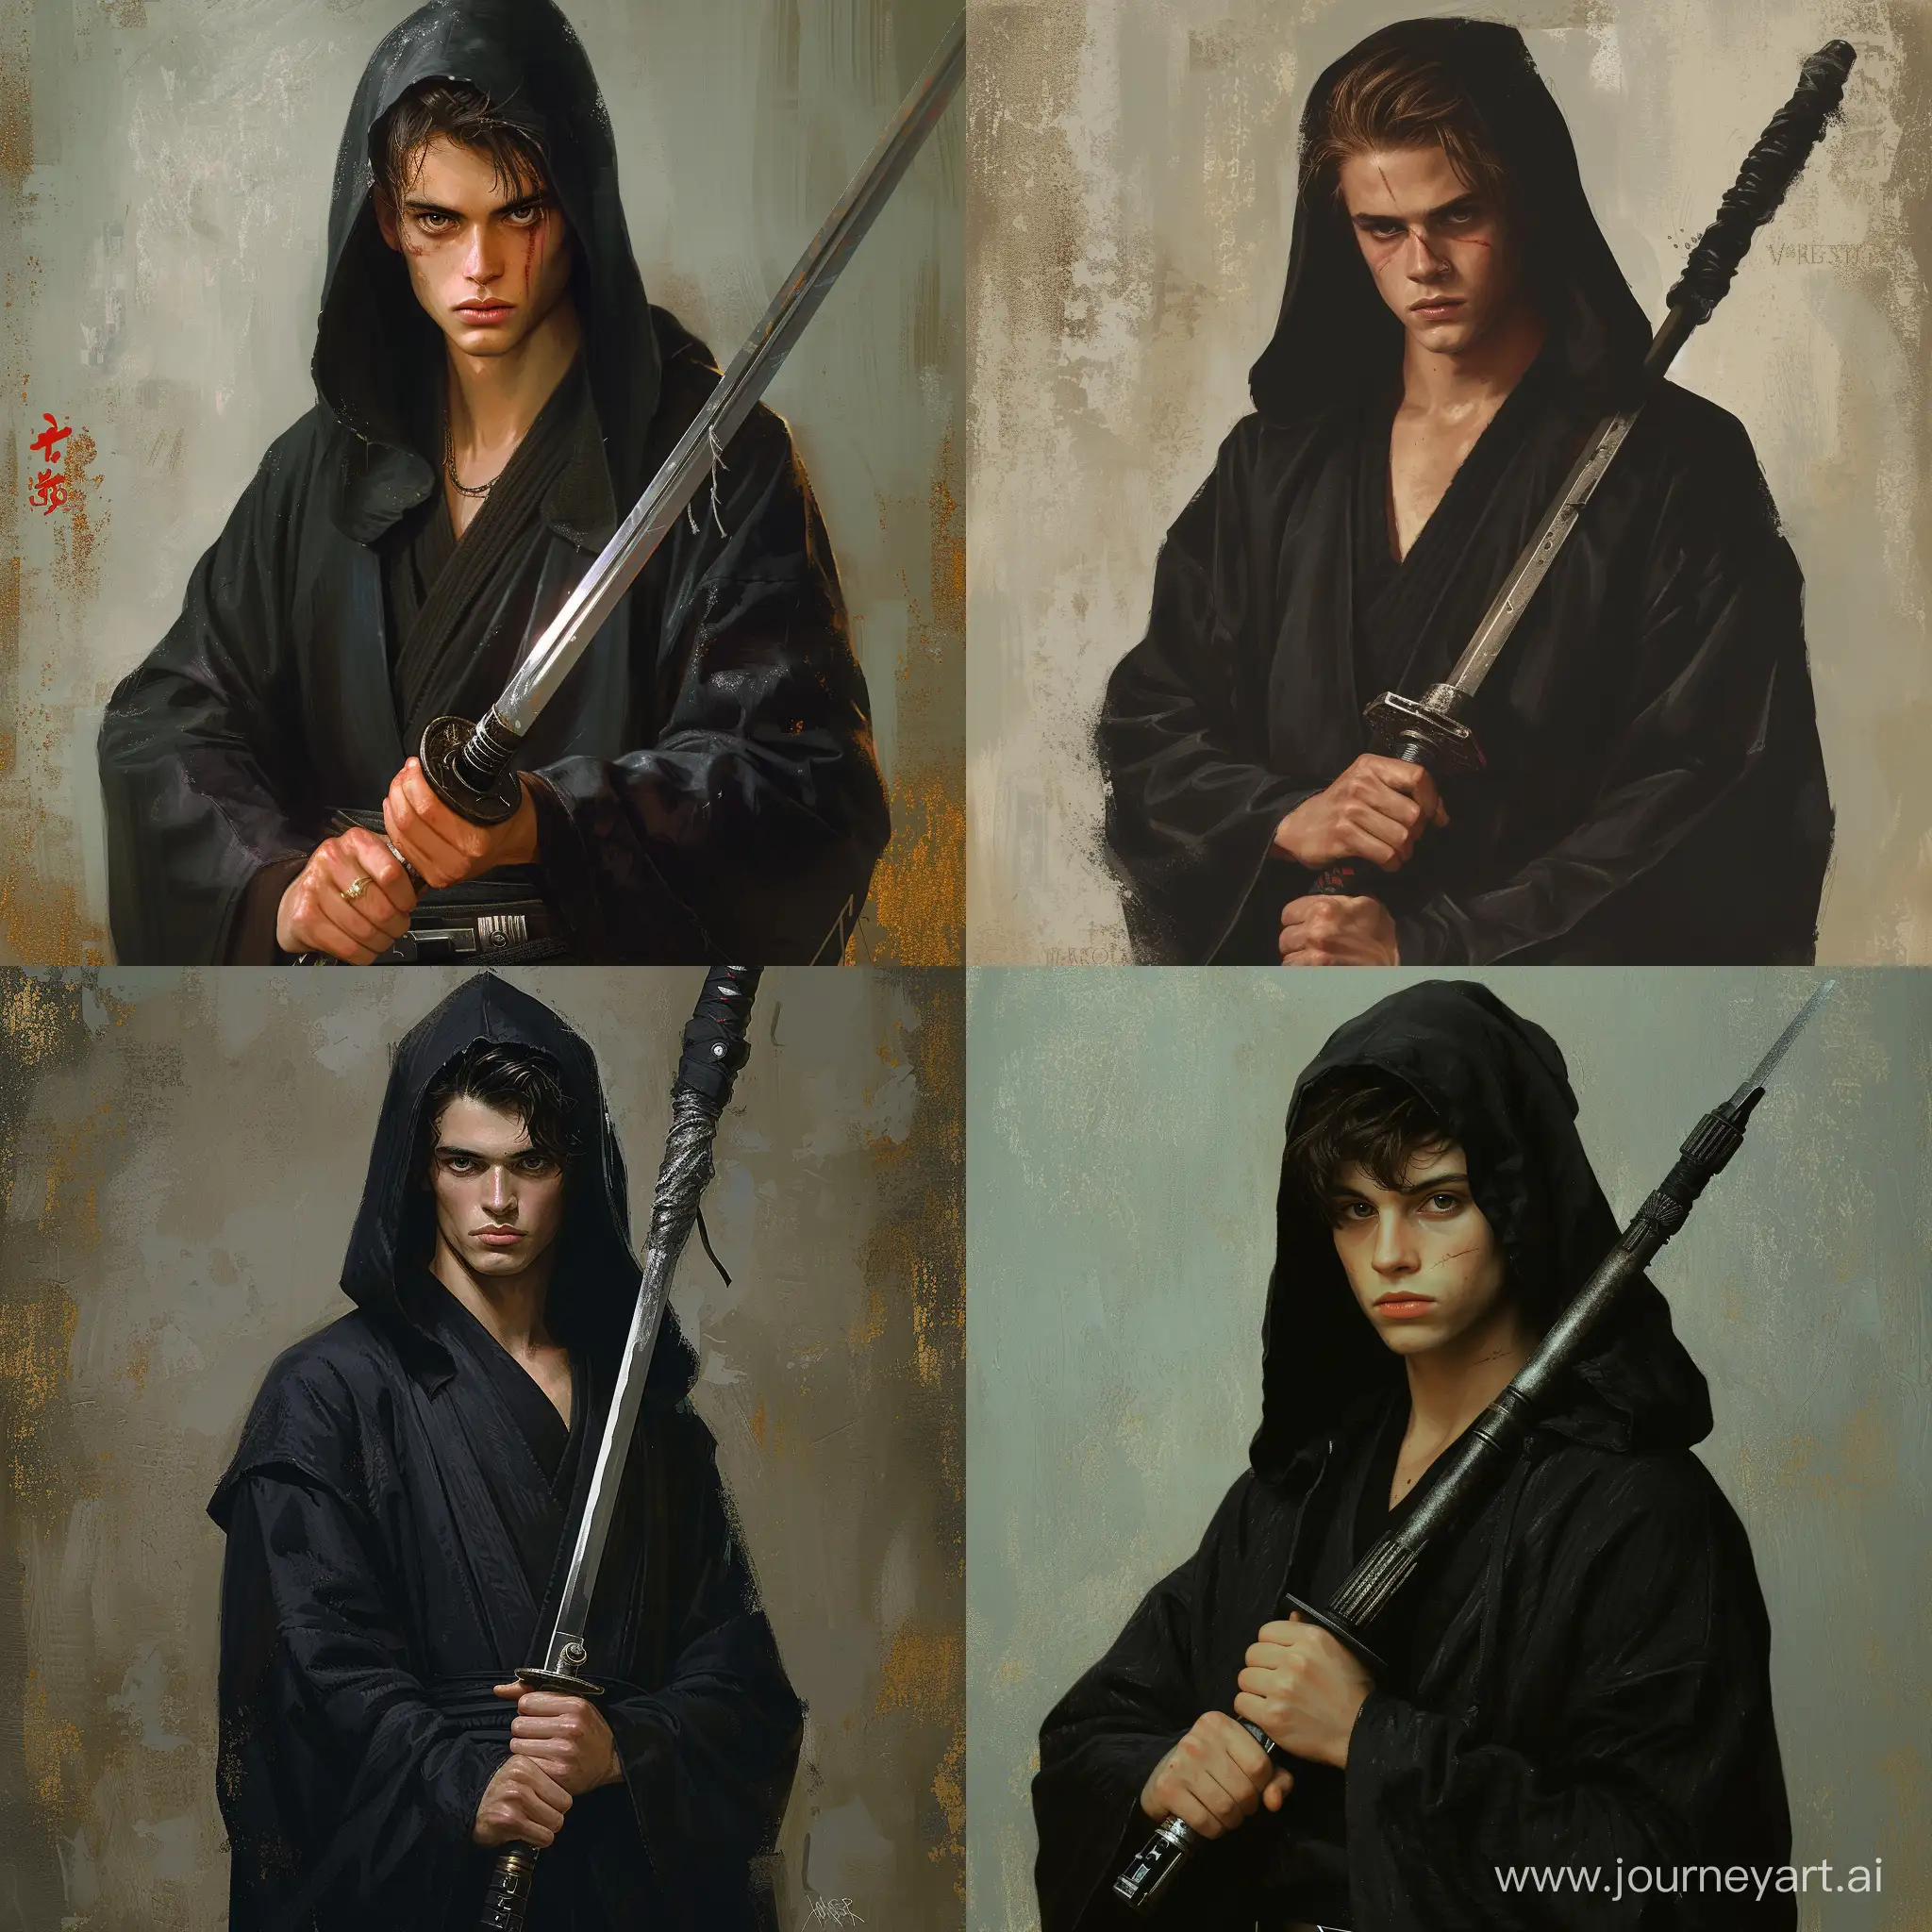 vagabond inspired young male holding a metal katana, in black kimono, in the hood, star wars art, sci fi